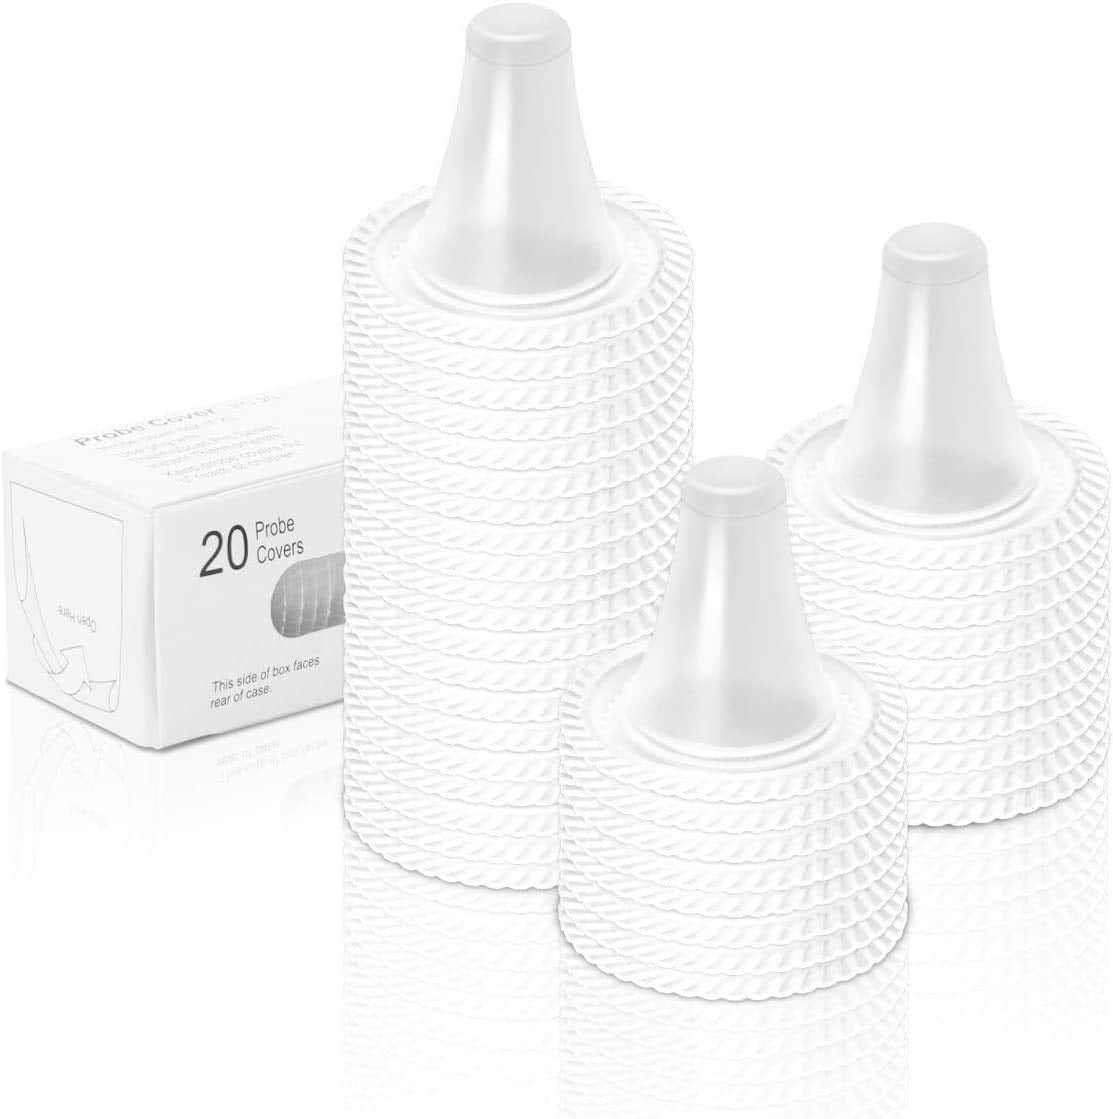 EssaUnica 200x Ear Thermometer Probe Covers Lens Filters Refill Caps for All Braun Models, BPA Free and Disposable for Braun